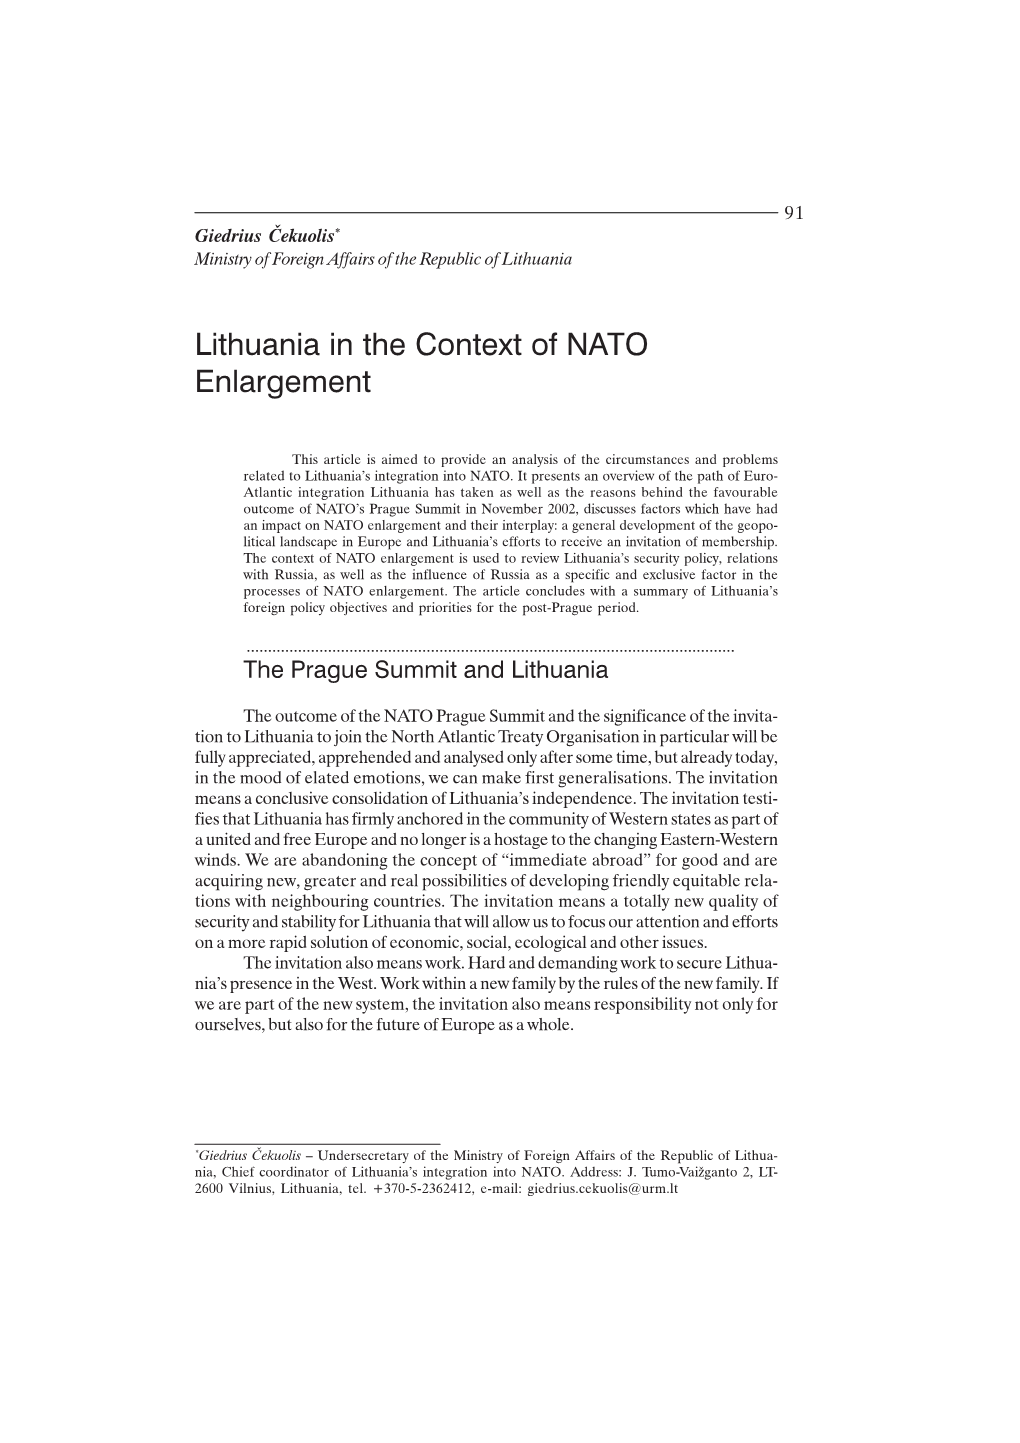 Lithuania in the Context of NATO Enlargement